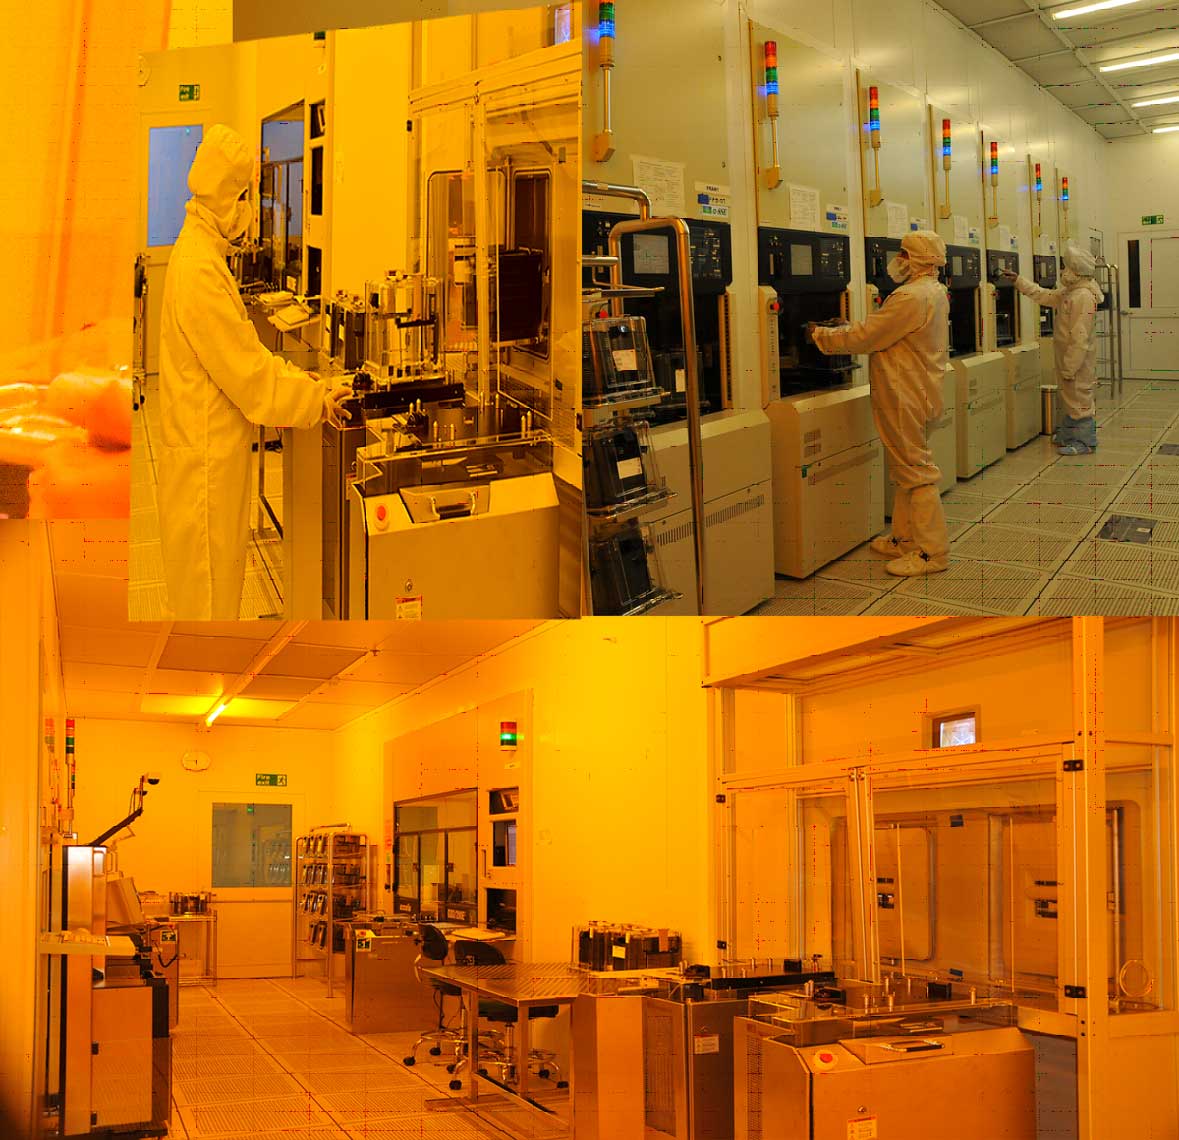 The processor was designed & fabricated by the Semi-Conductor Laboratory (SCL) at Chandigarh using technology node of 180 nm. The processor has a 16 bit, RISC-V architecture with a base clock speed of 80 Mhz. There is a 32 bit variant being made too.Pic : Wafer fabrication site